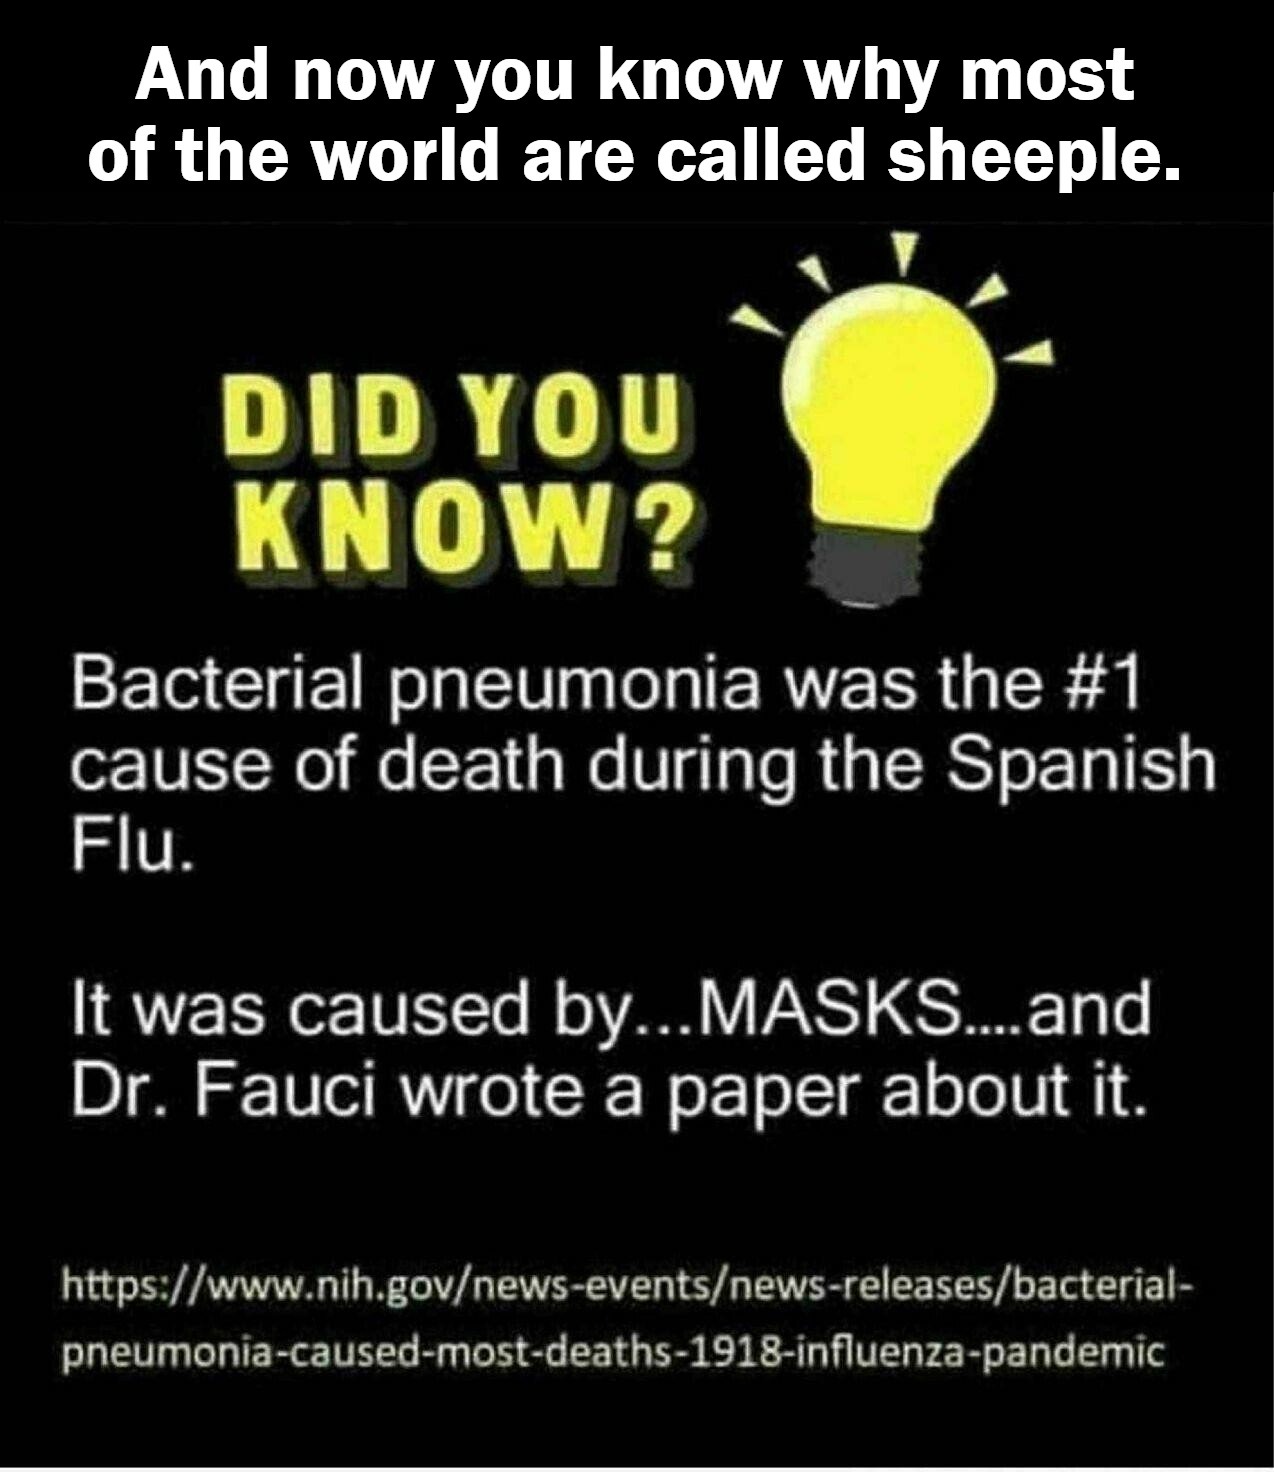 And now you know why most of the world are called sheeple | image tagged in we the sheeple,sheeple,the mask,covidiots,plandemic,agenda 21 depopulation | made w/ Imgflip meme maker